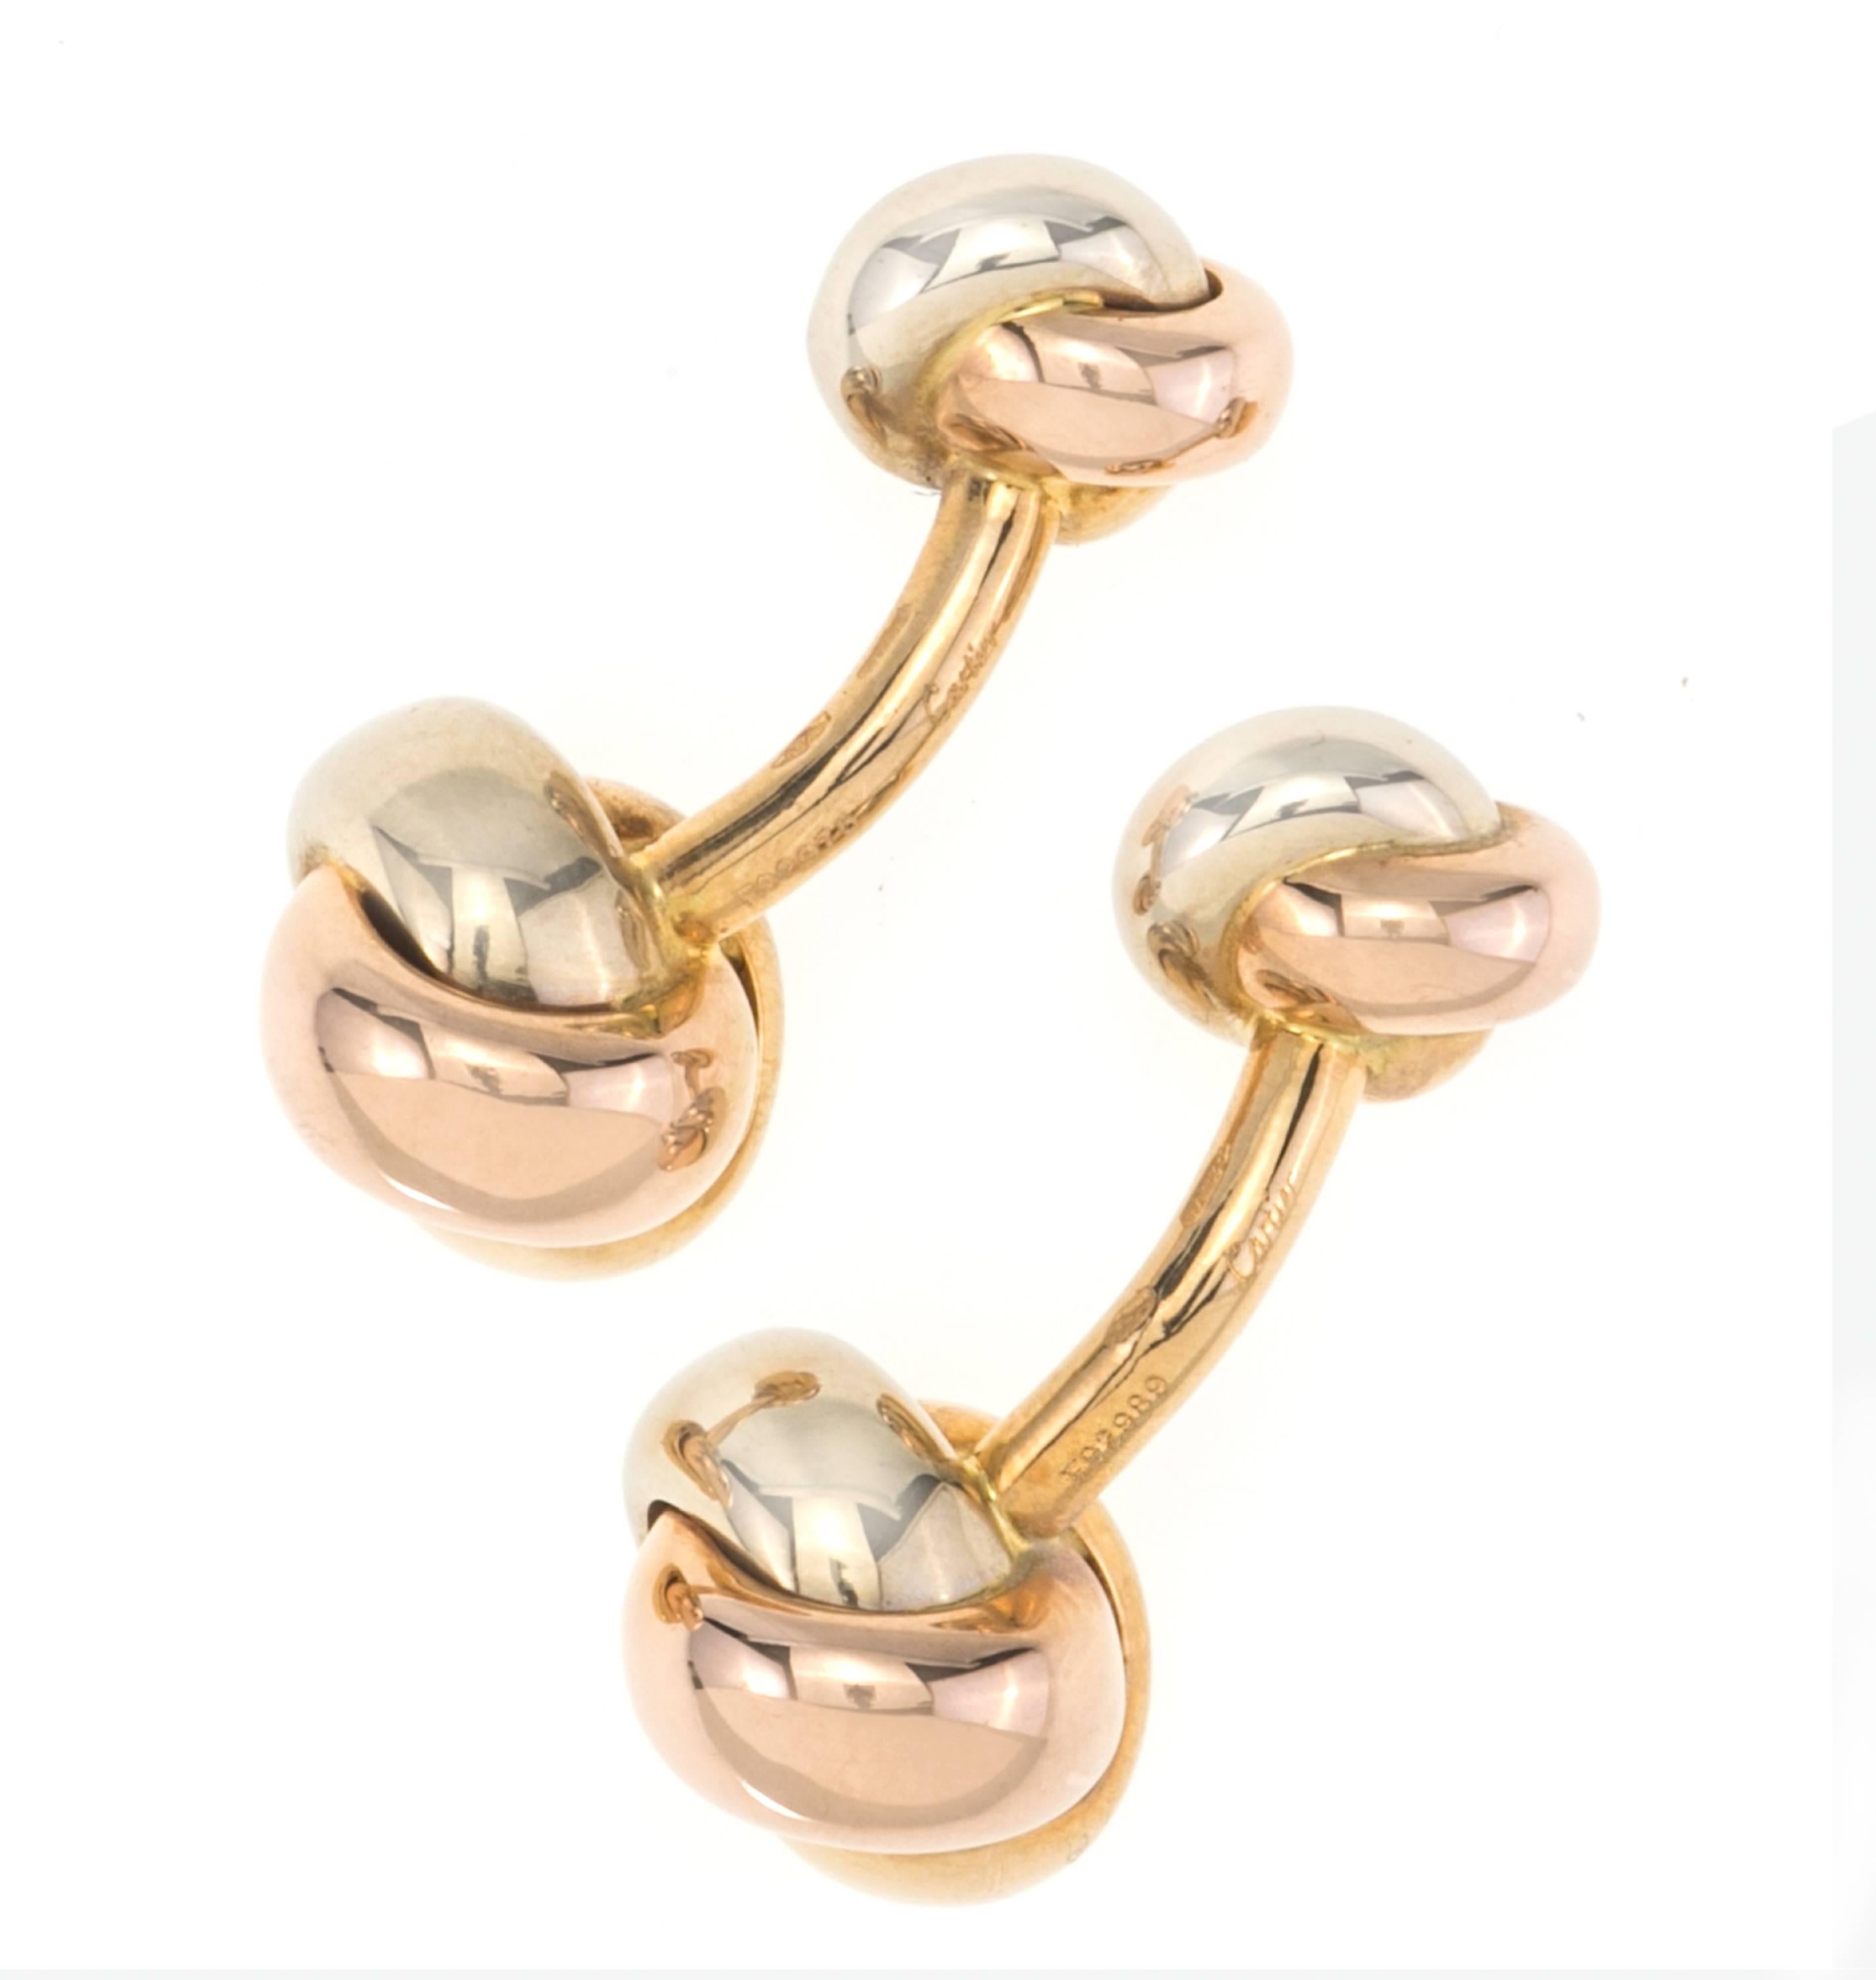 Cartier 18k tri l color knot cuff links.  Knots made up of 18k white, yellow and rose gold.  Original Cartier Box included.  Cartier hallmarked and Serial number on the shank.